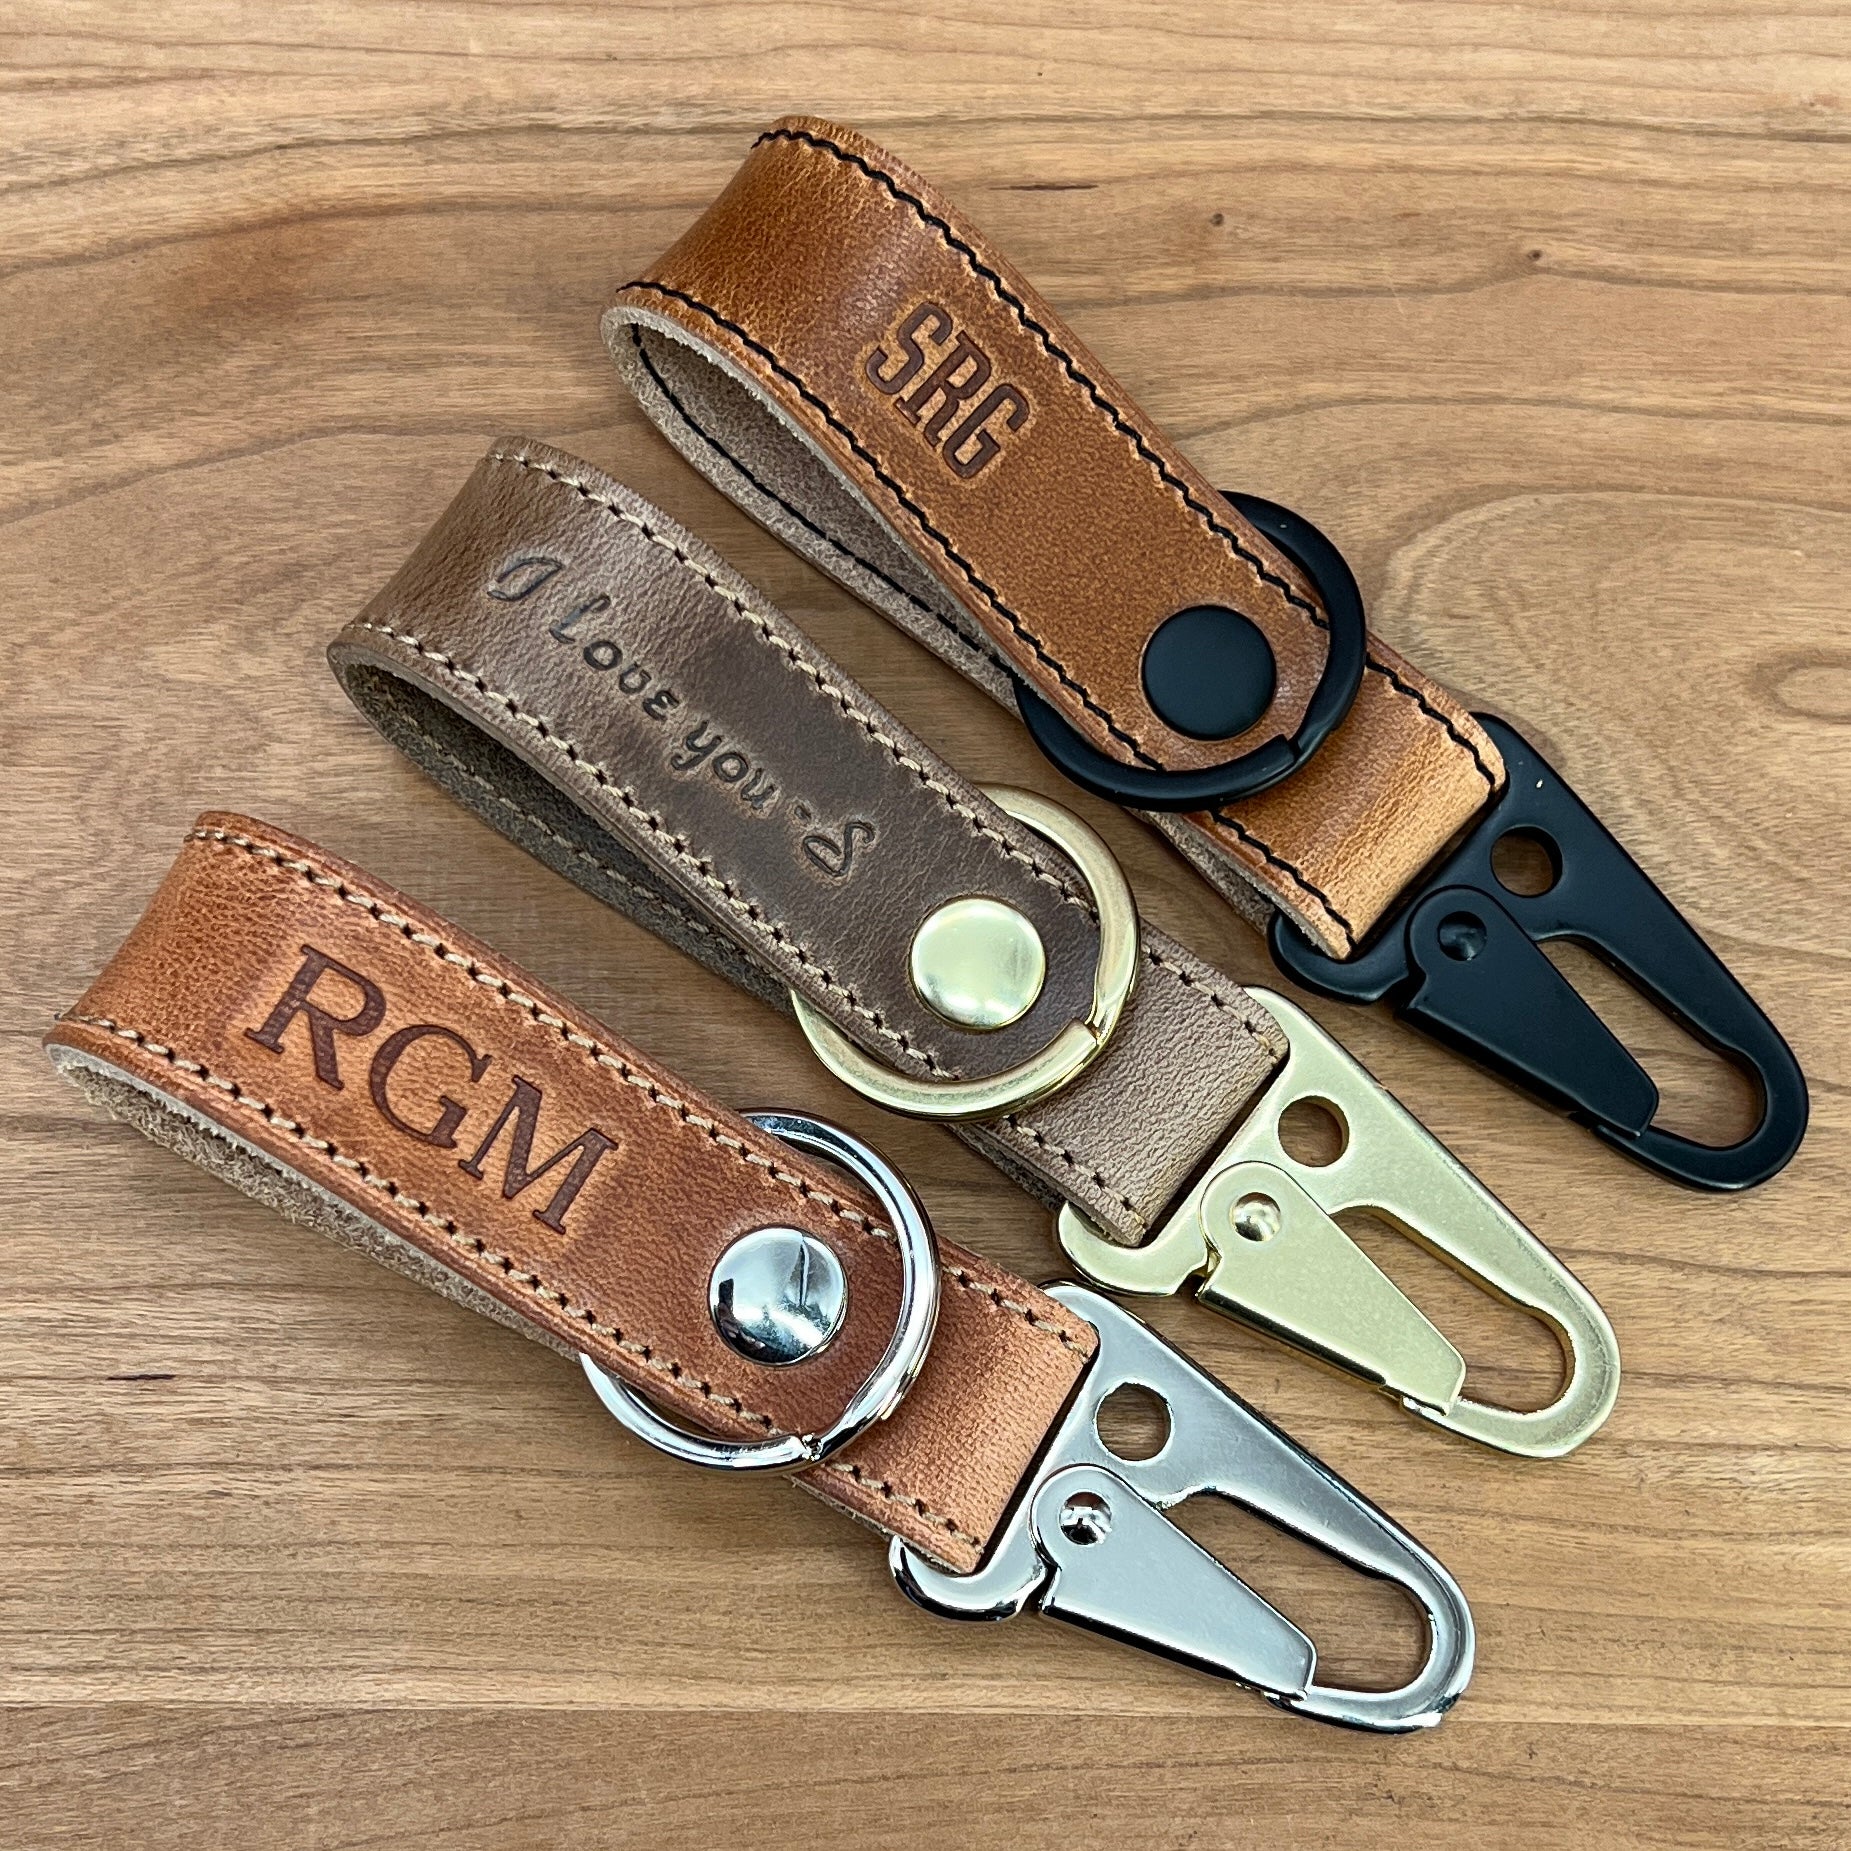 Horween Leather Belt and Keychain – Handmade Houston, Loop Order TX Pen Custom Leather to | in